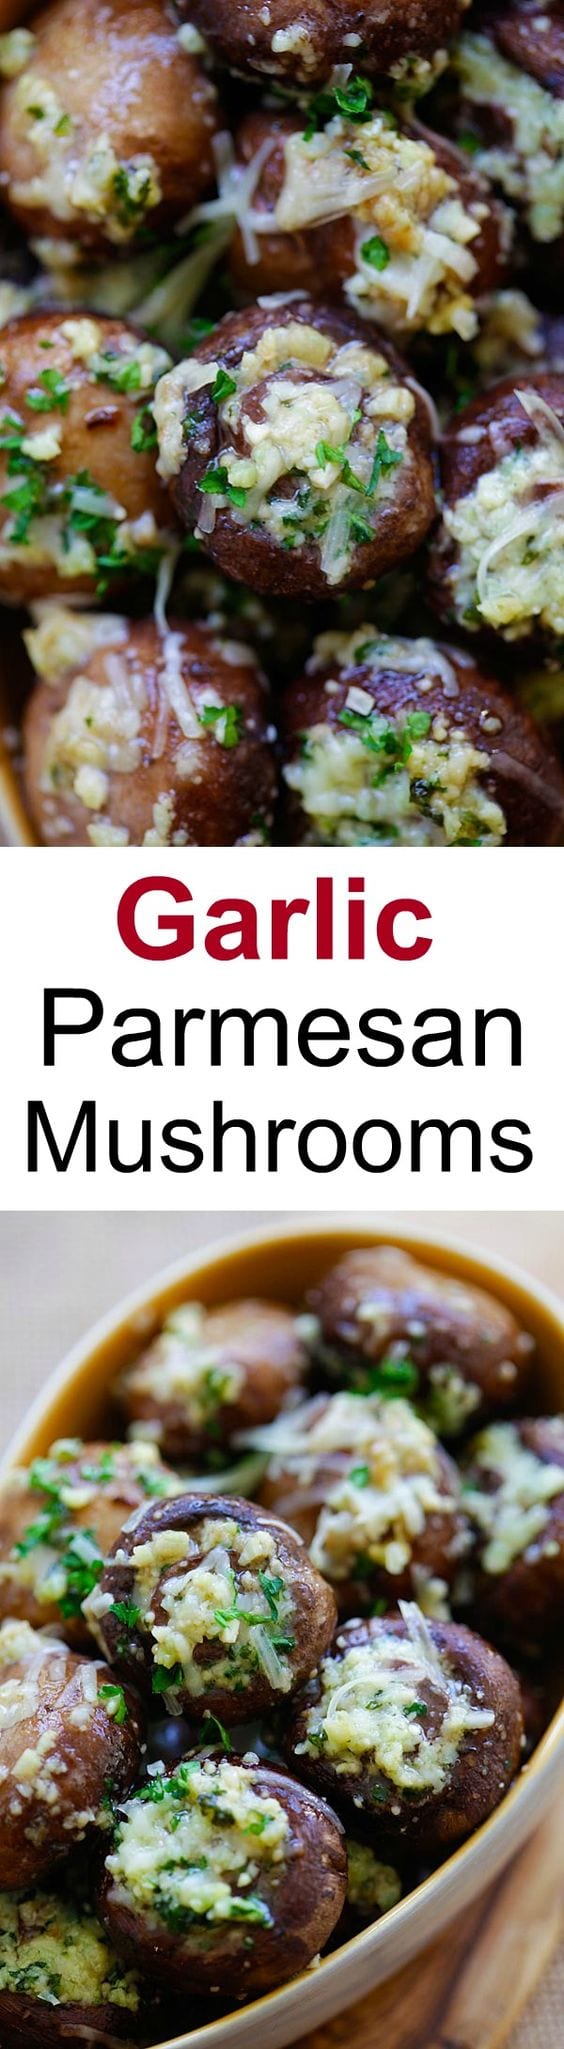 Garlic Parmesan Roasted Mushrooms – buttery and delicious oven roasted mushrooms loaded with garlic and Parmesan cheese. Takes 8 mins prep | rasamalaysia.com